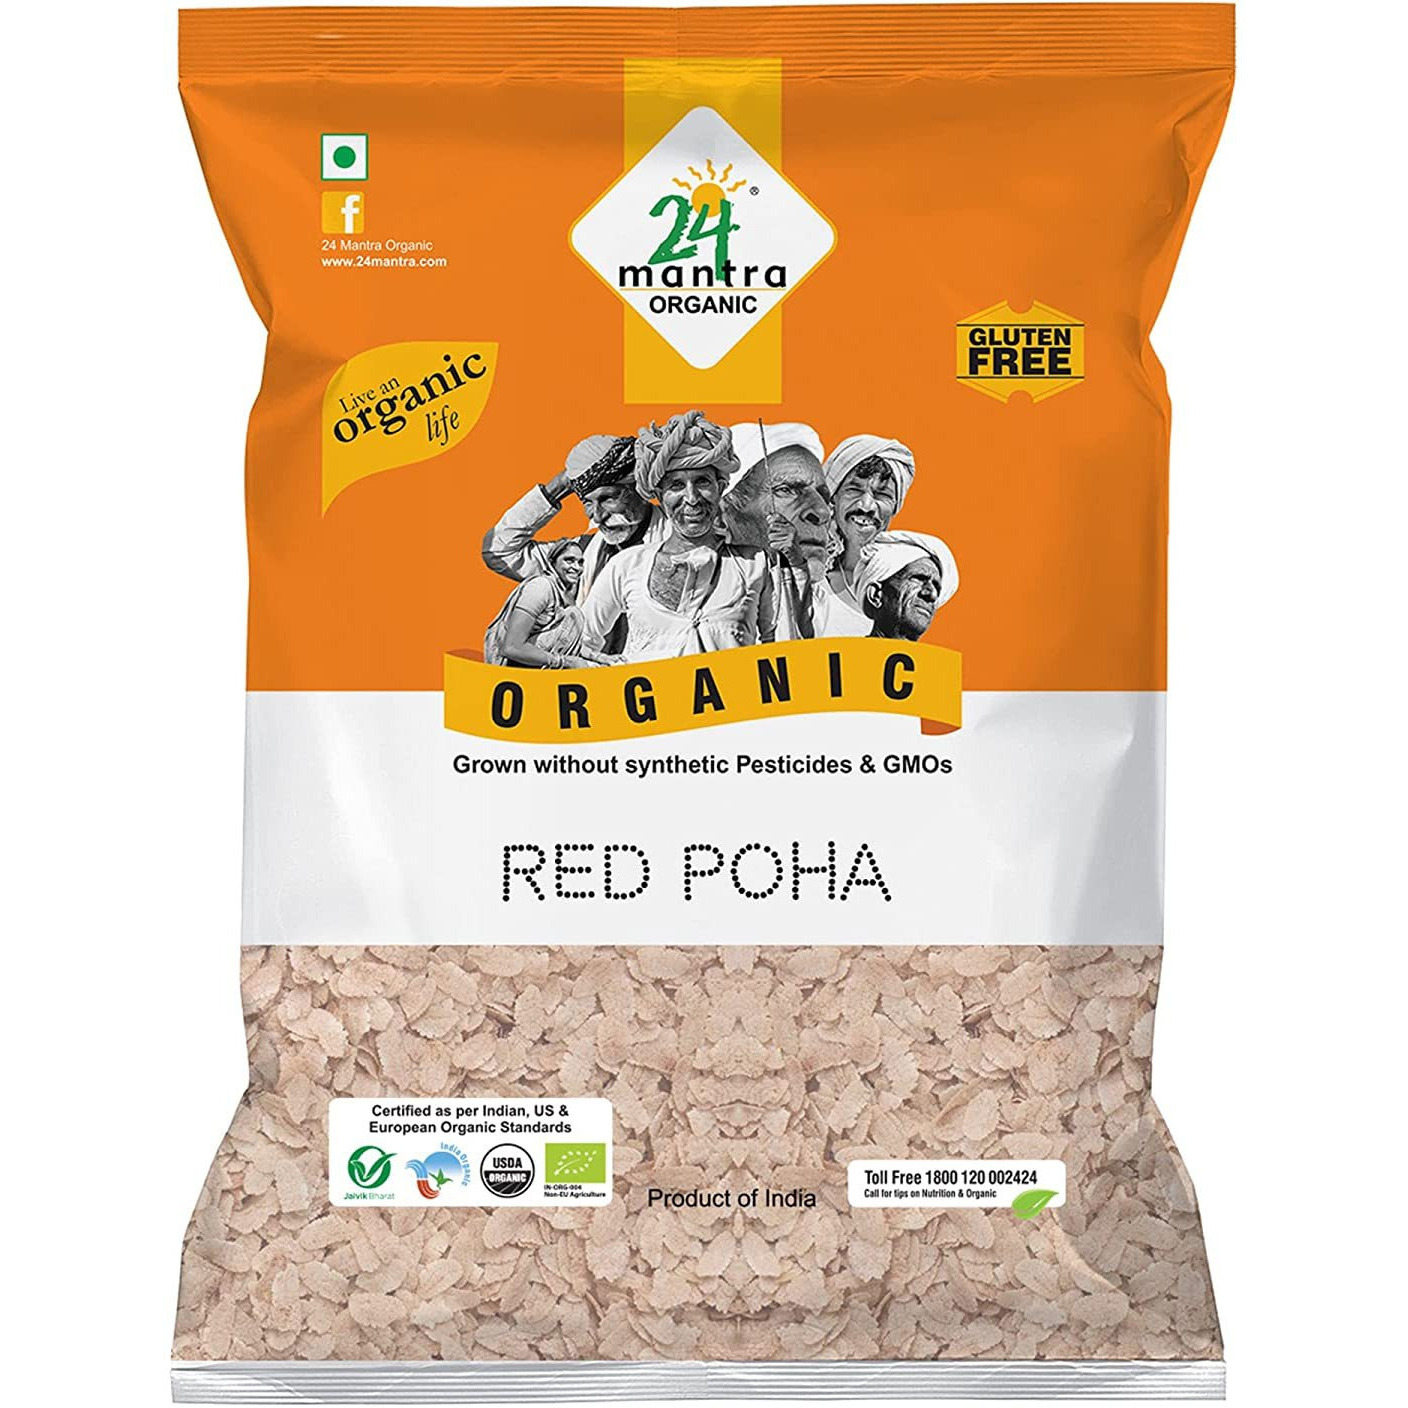 Pack of 2 - 24 Mantra Organic Red Poha - 2 Lb (908 Gm)